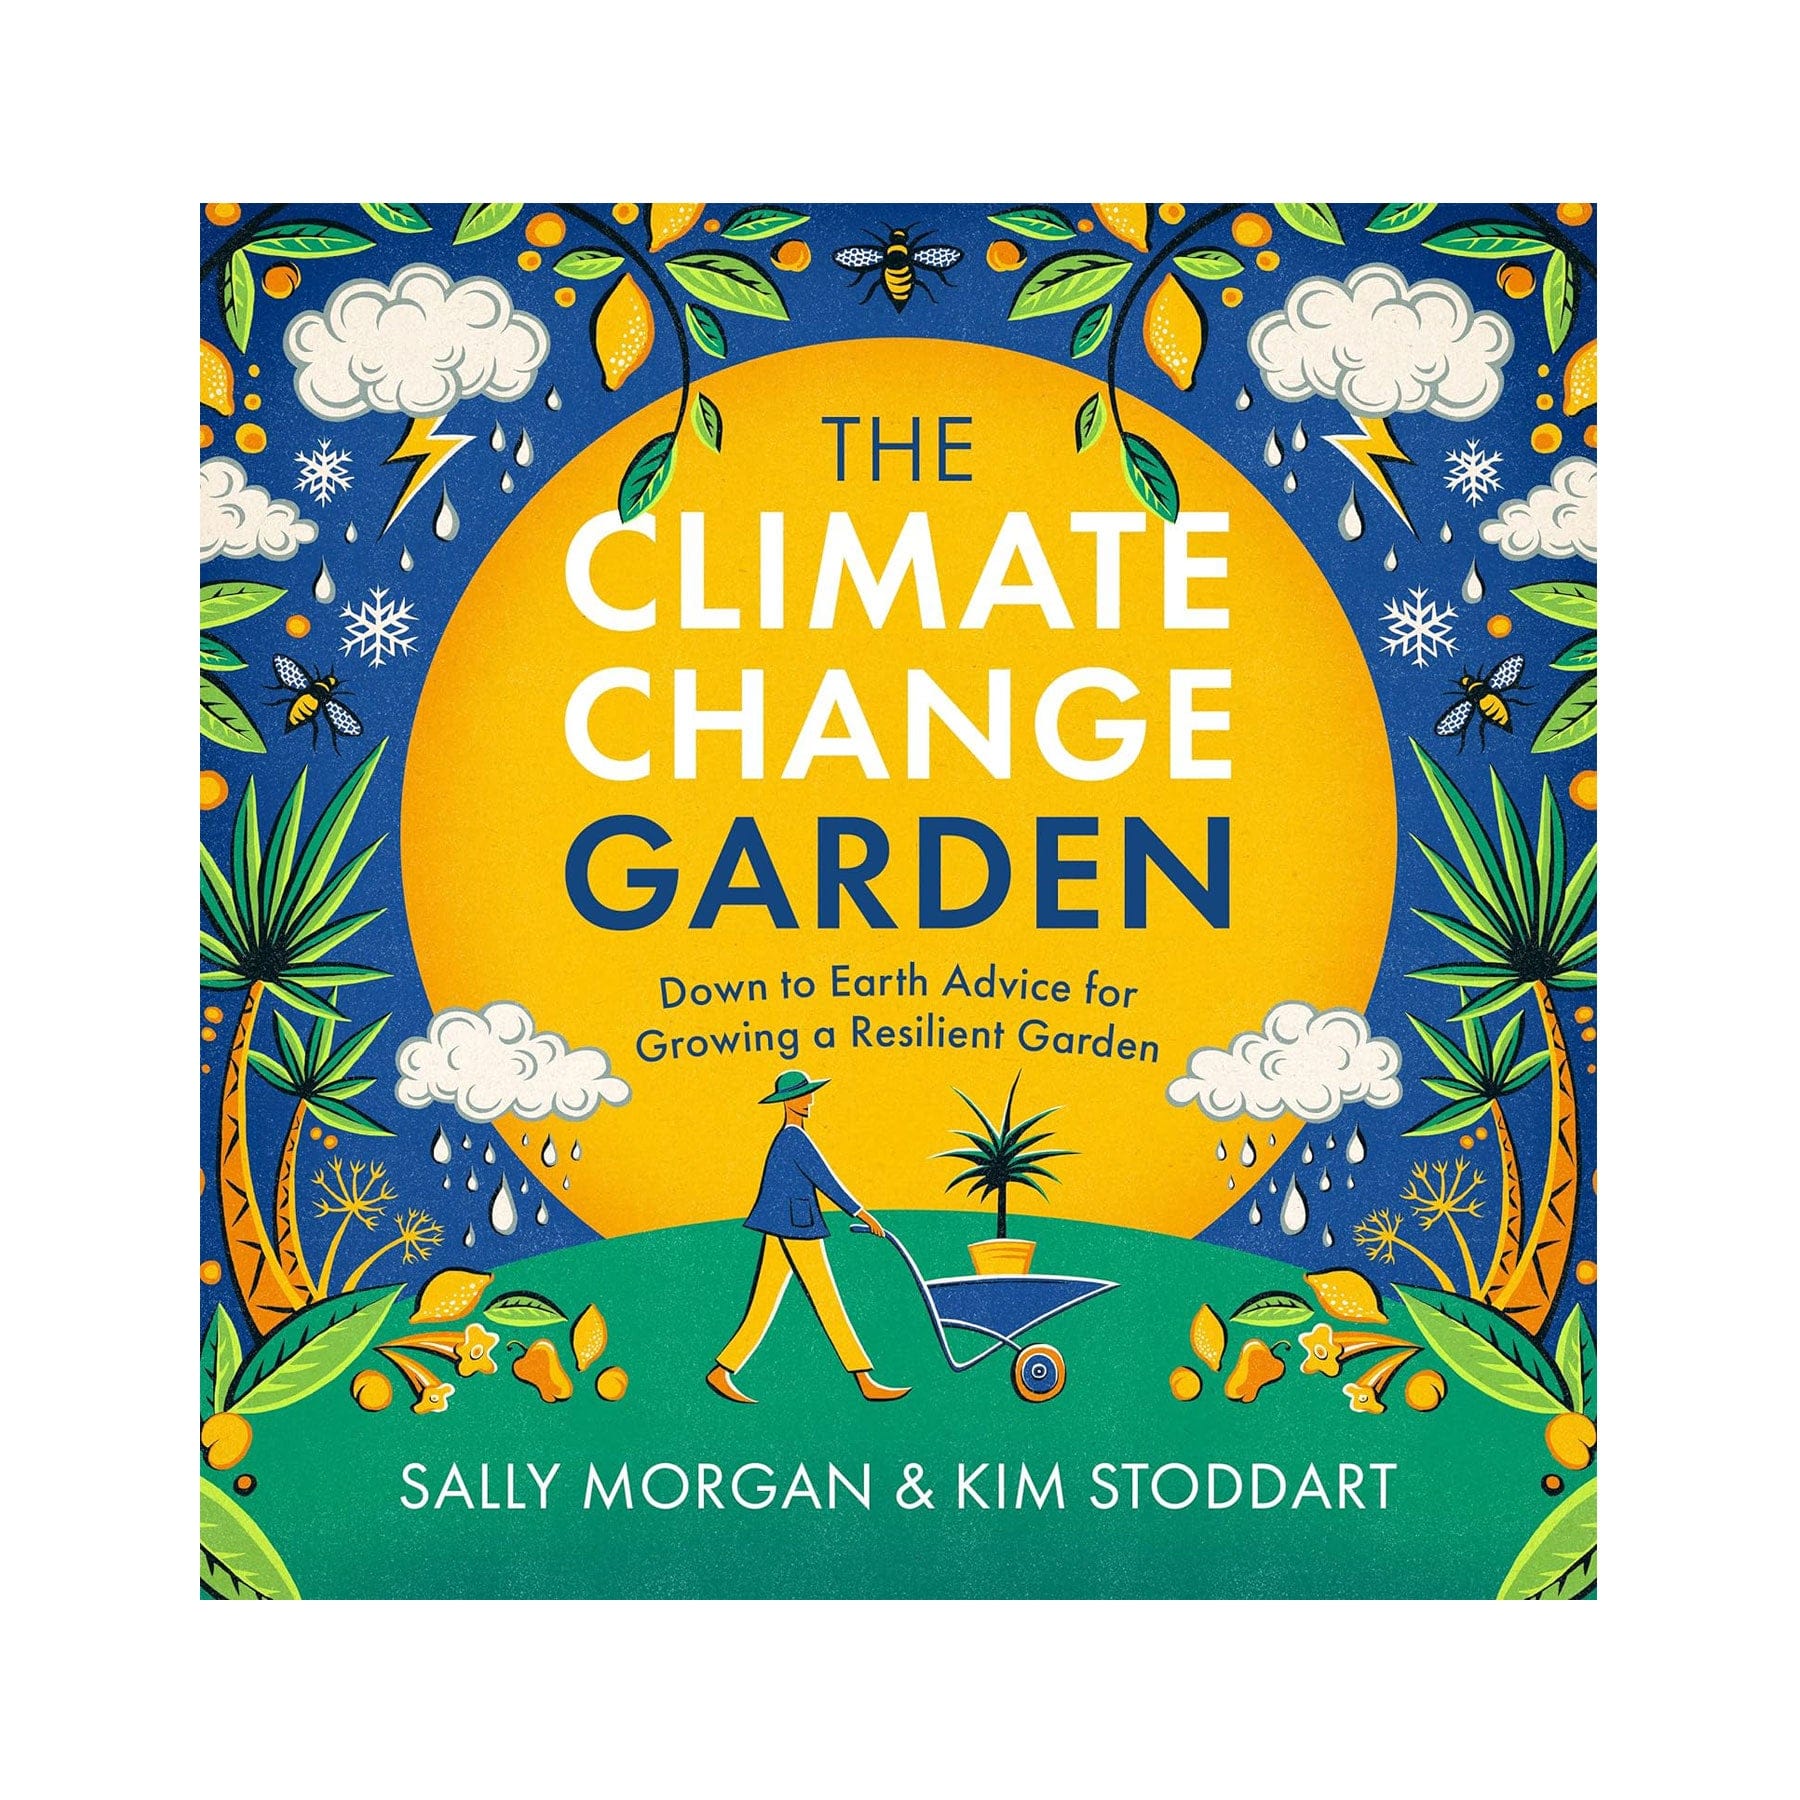 The Climate Change Garden